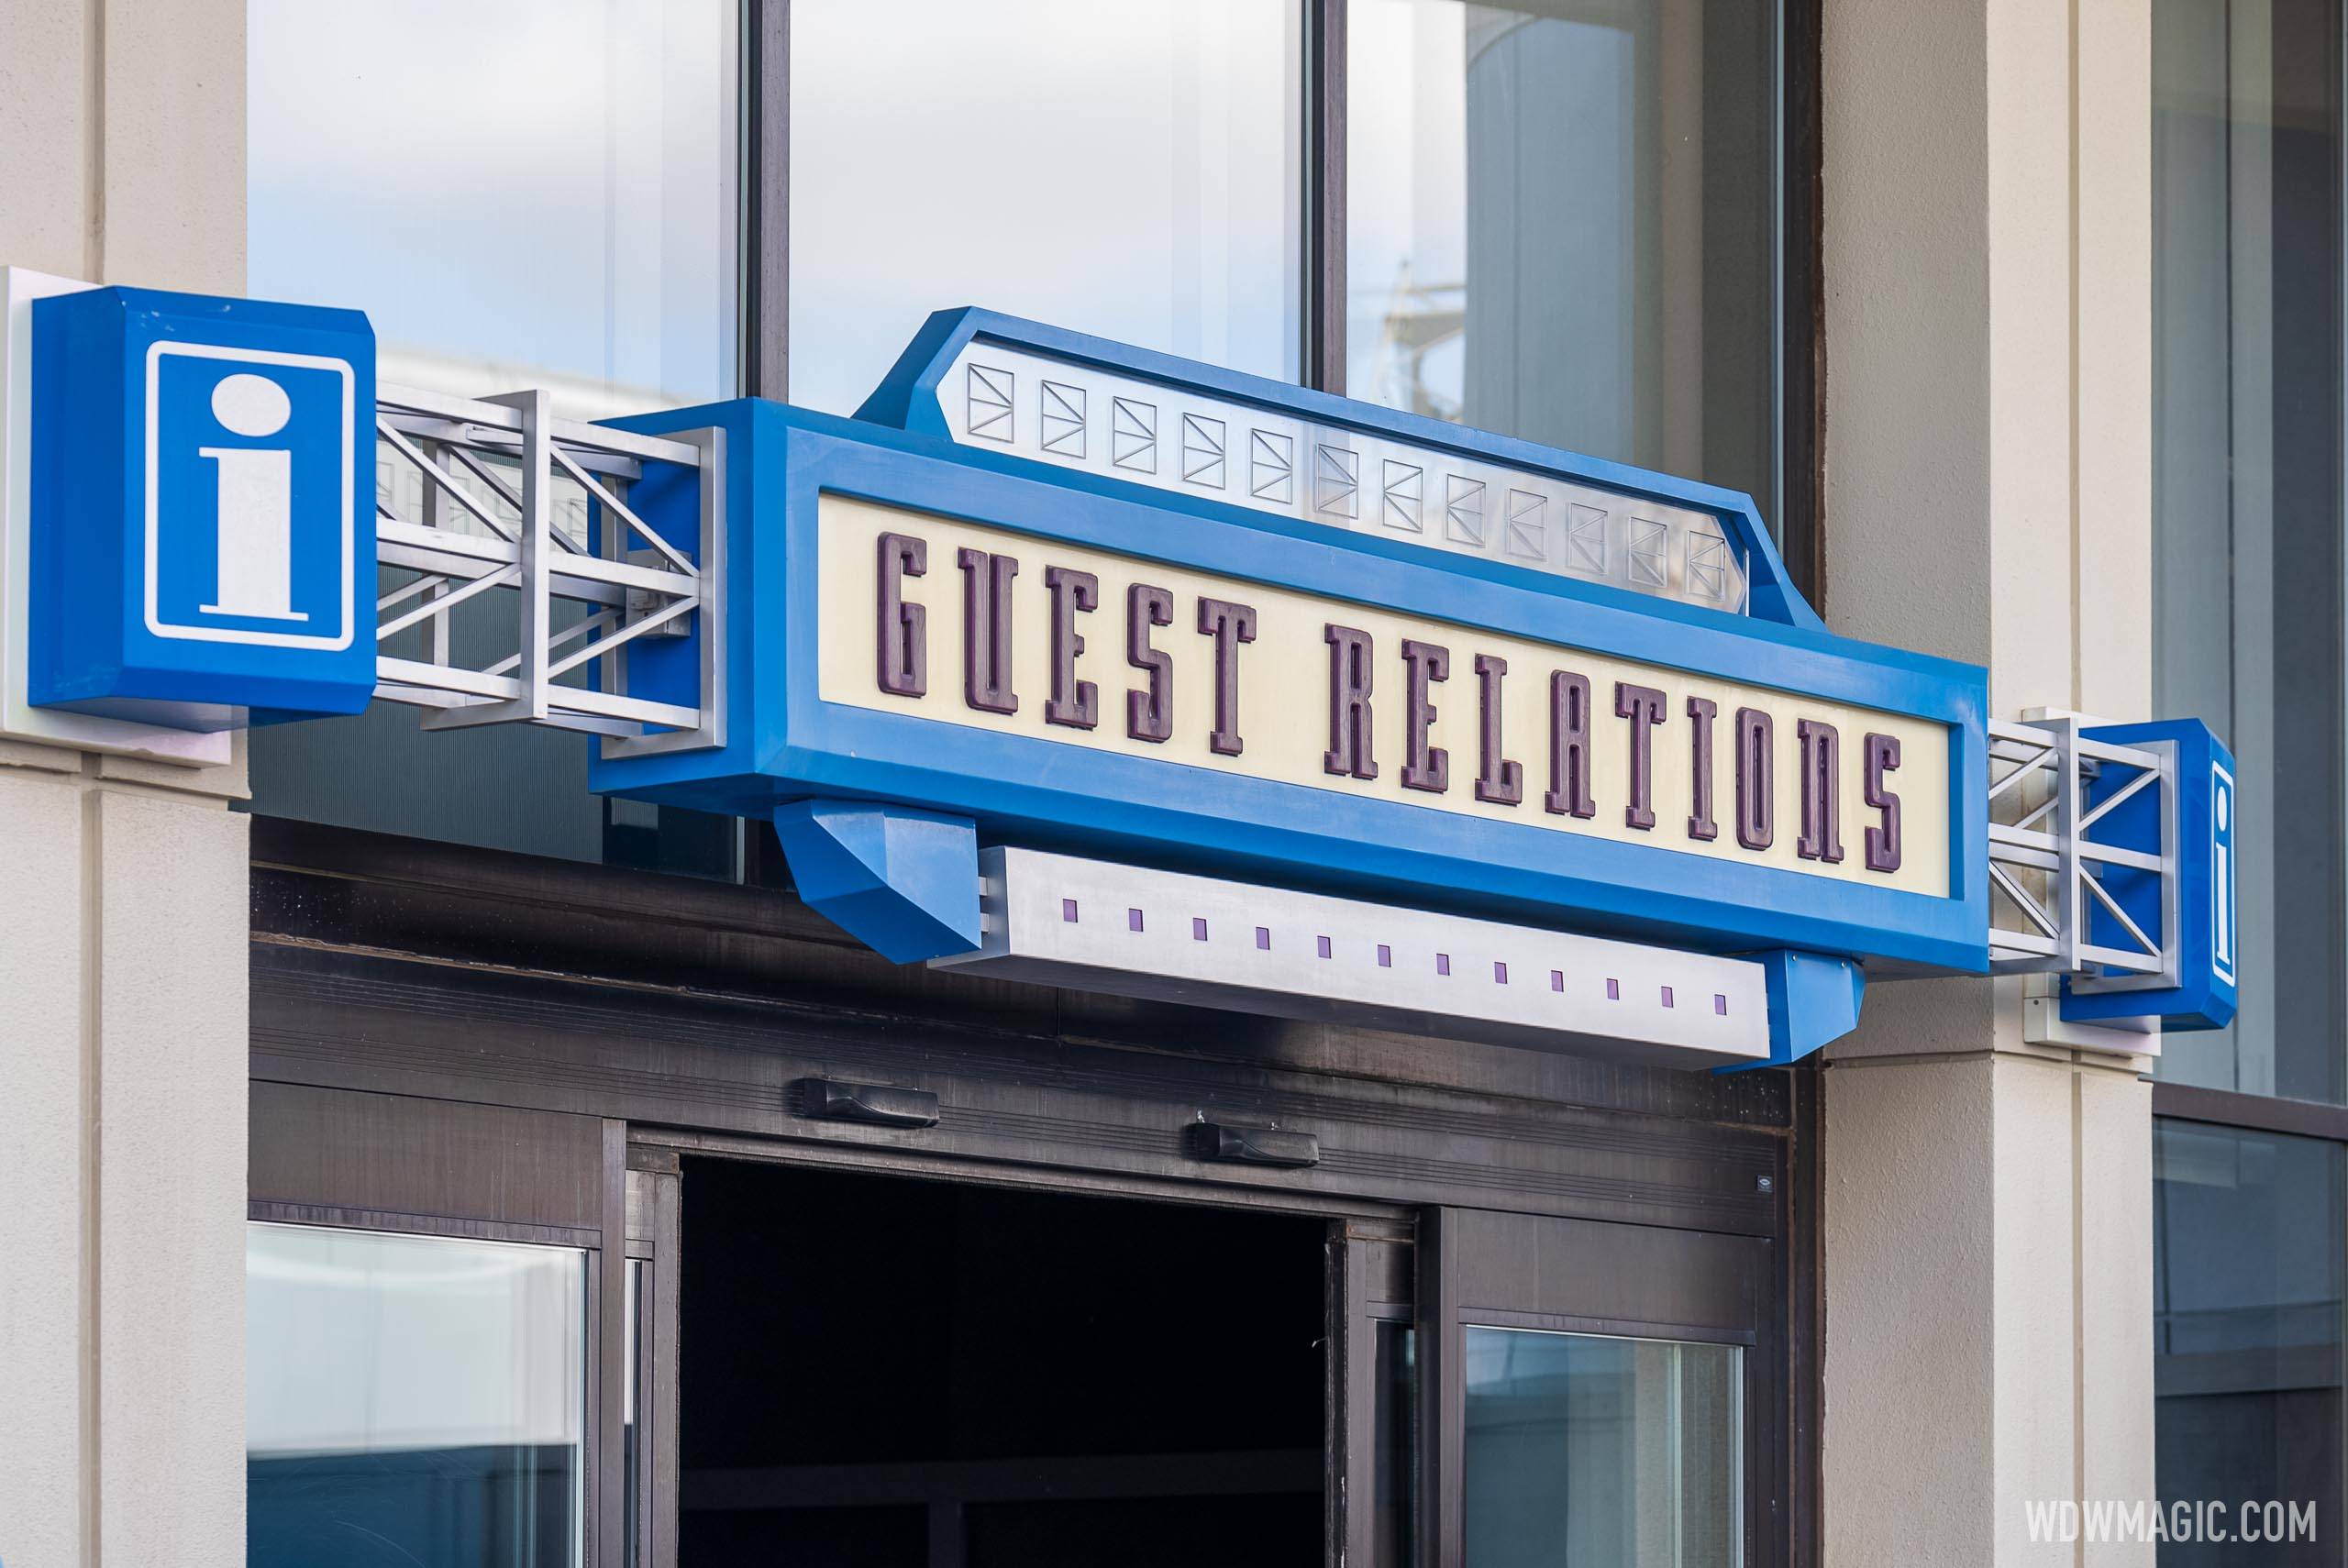 The former Guest Relations sign which has now been removed